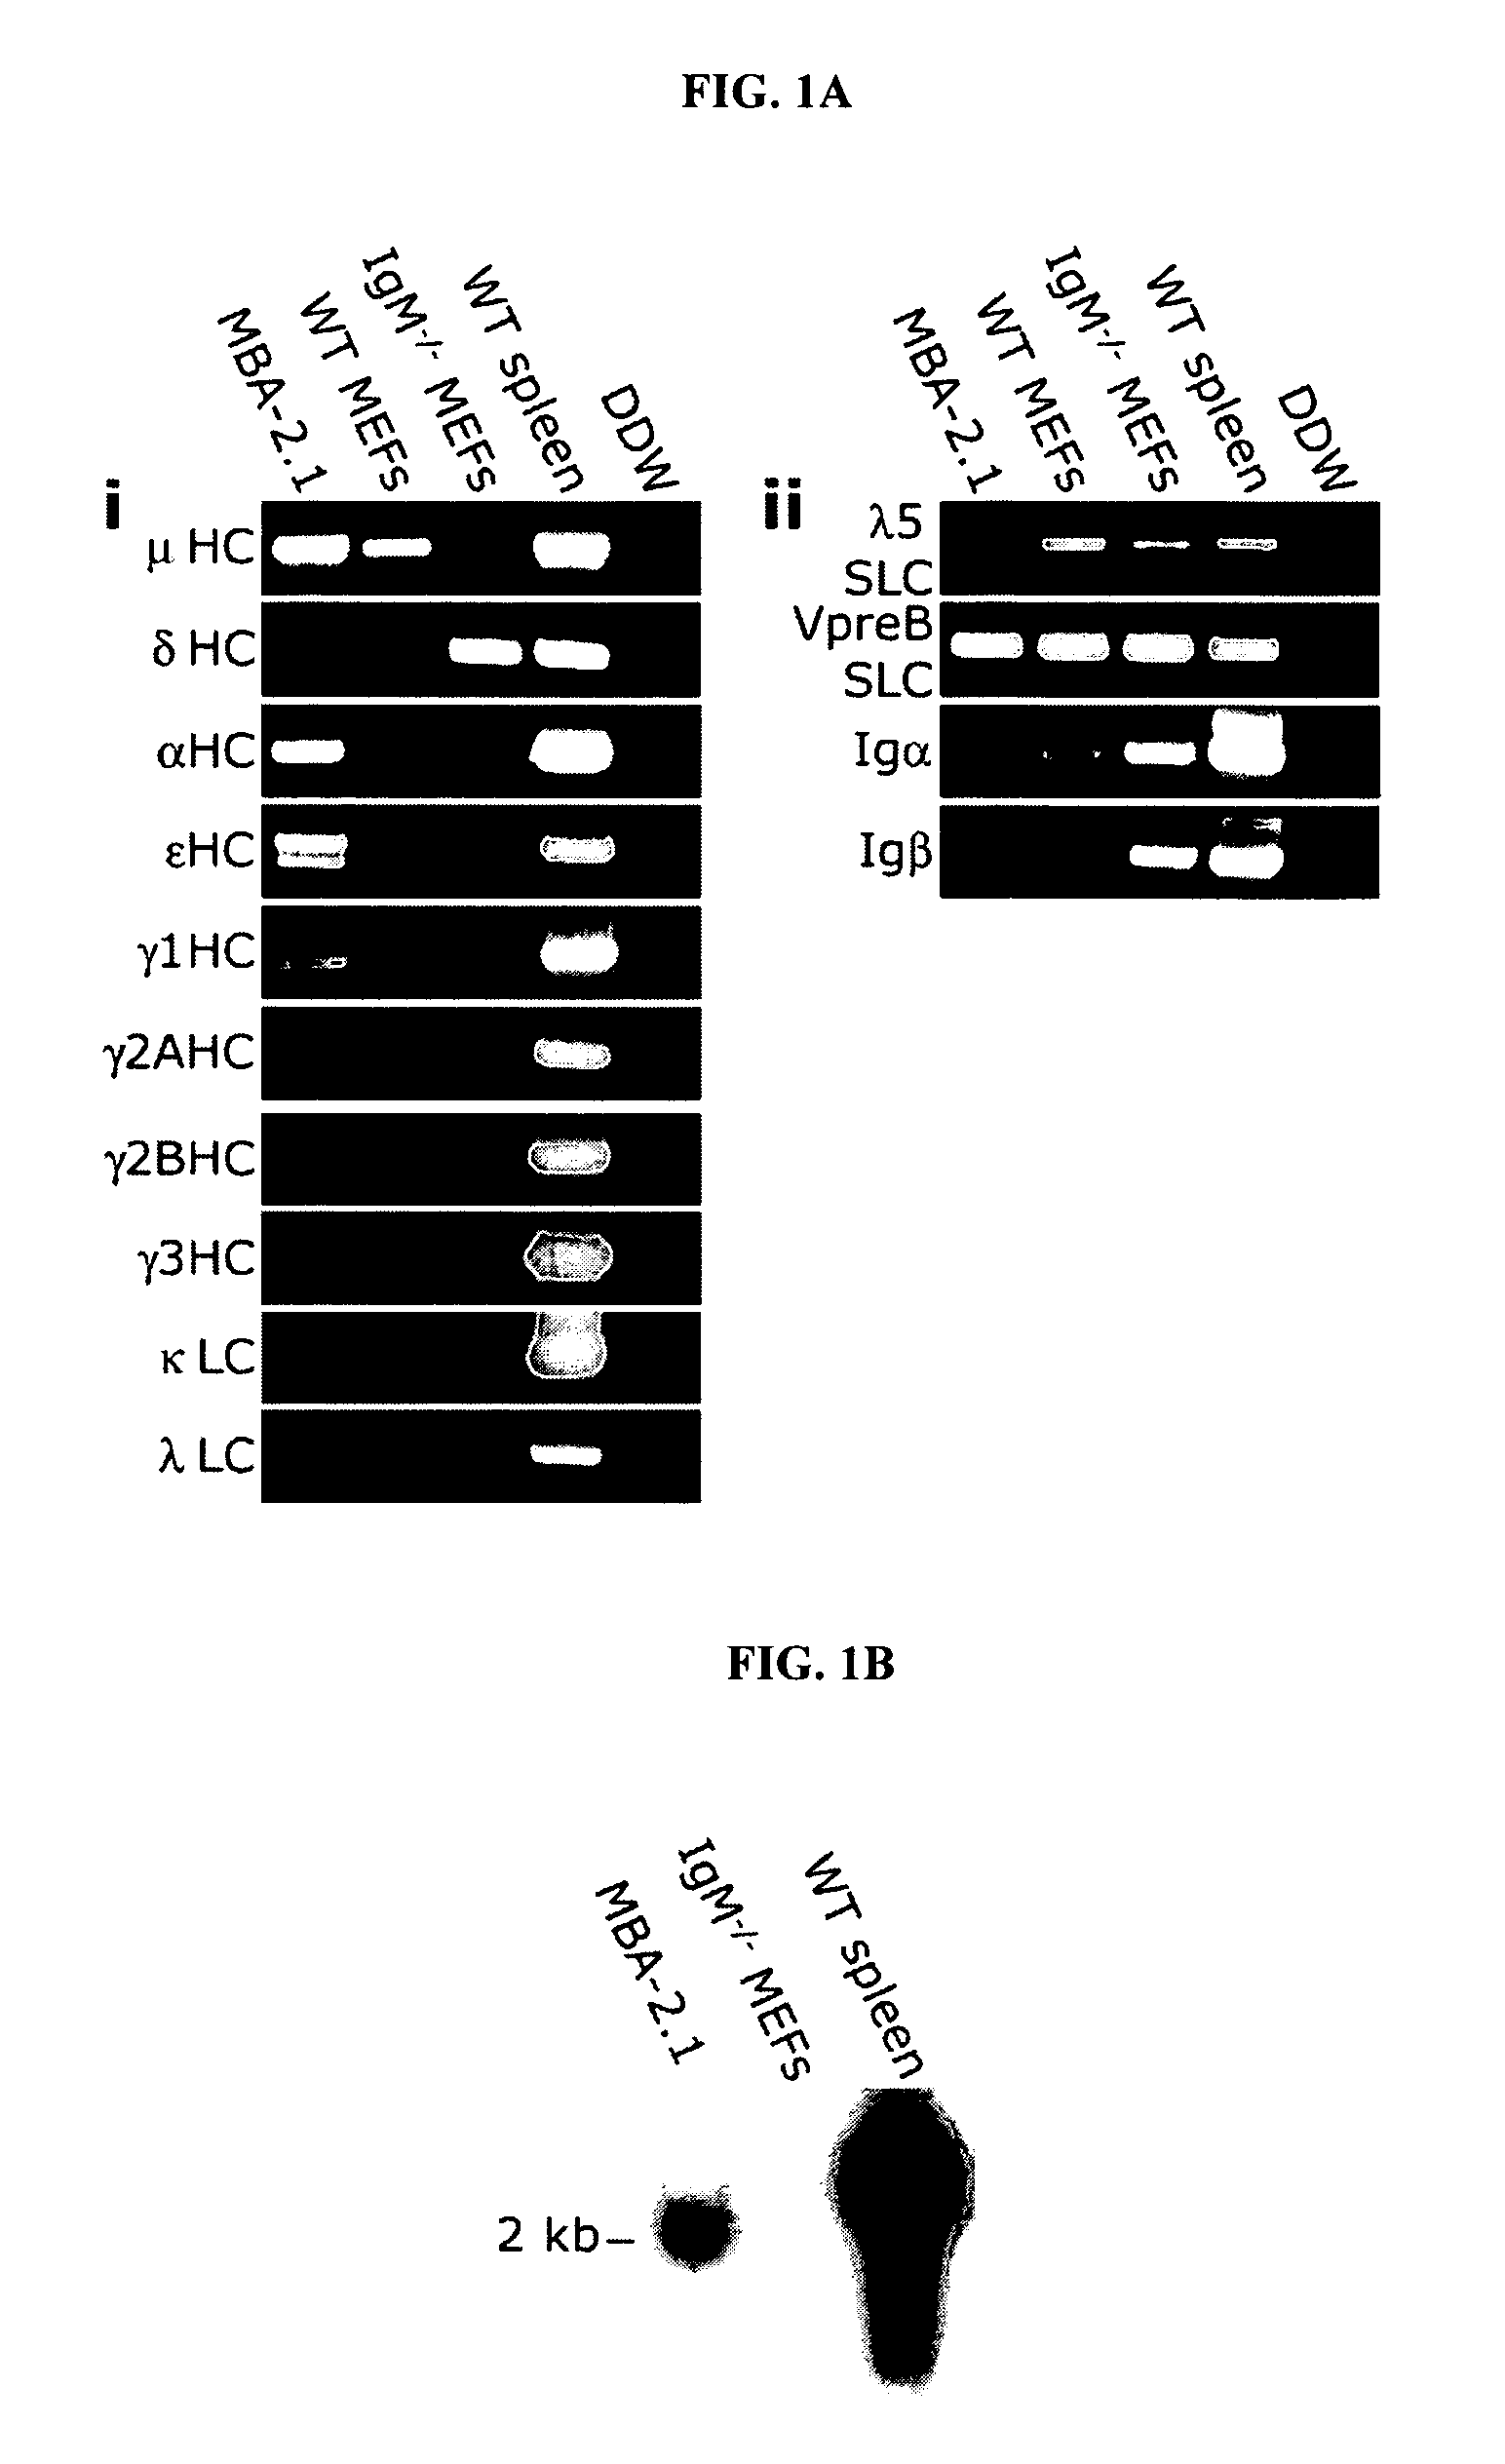 Immunoglobulin heavy chain variants expressed in mesenchymal cells and therapeutic uses thereof